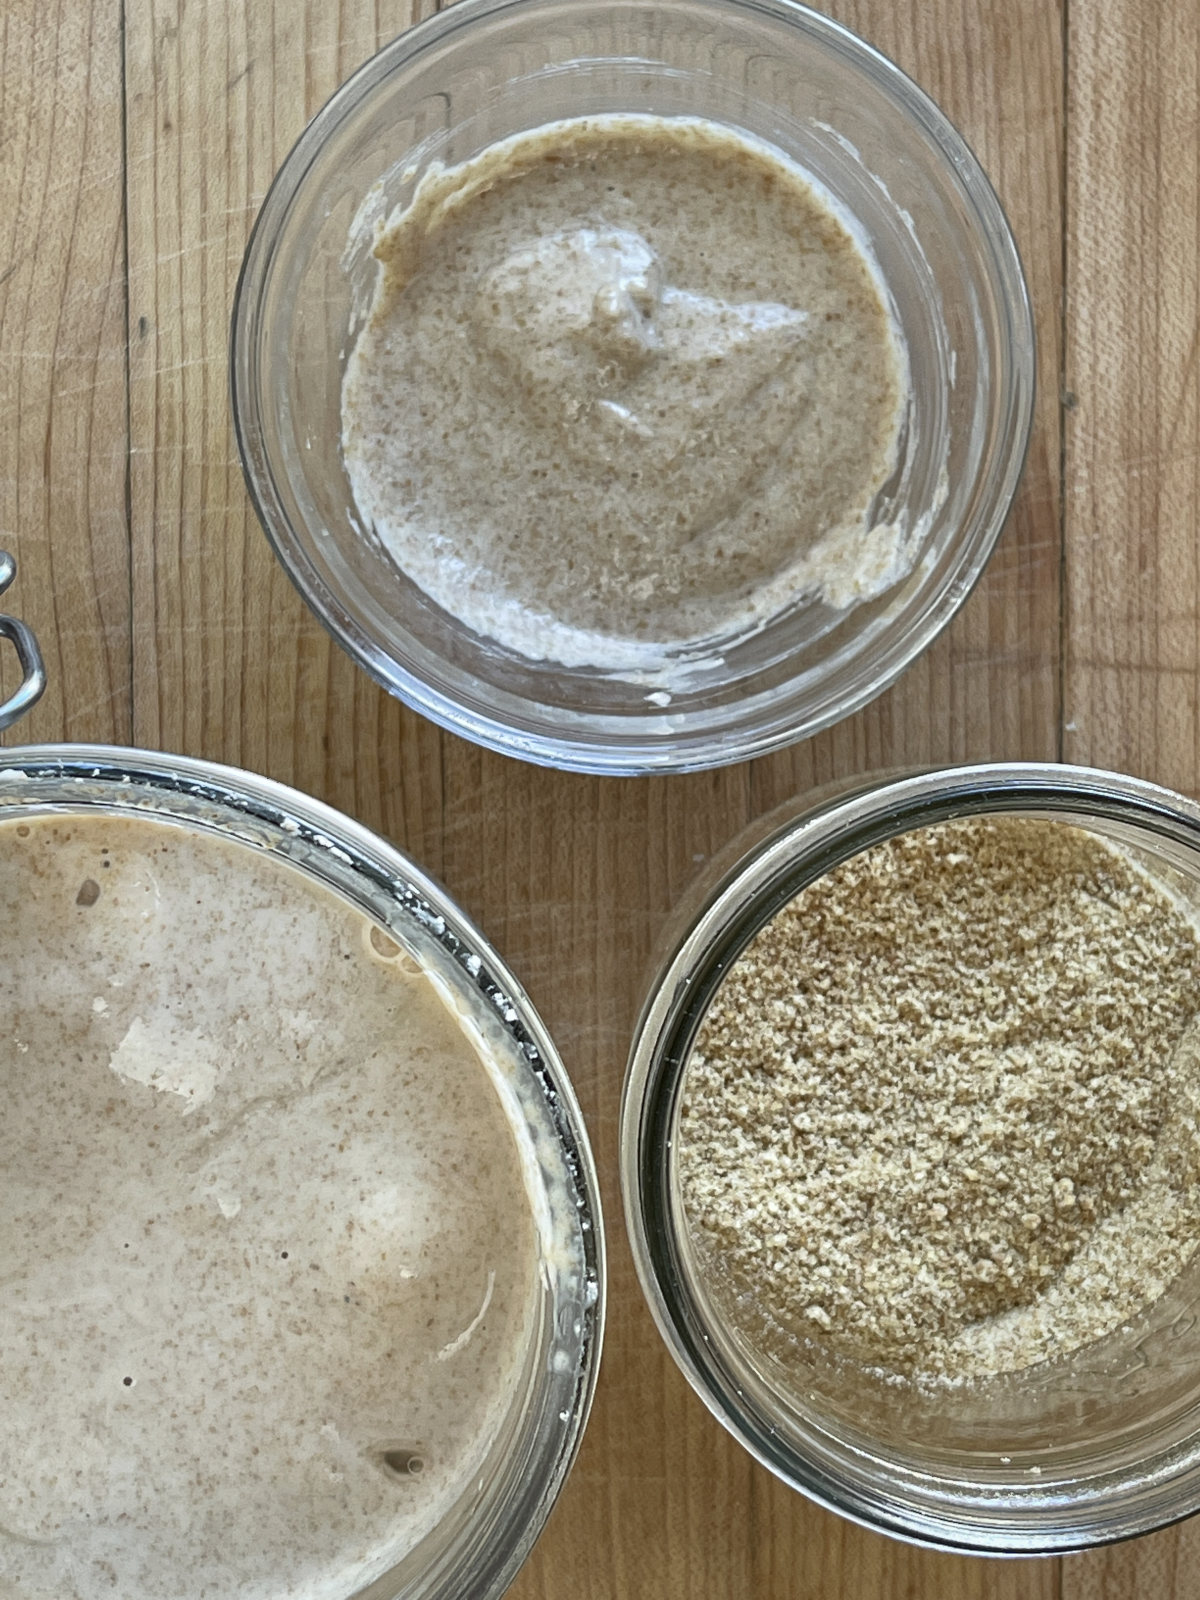 A glass bowl at the top contains a sourdough discard flax egg. The jar on the bottom left contains sourdough discard. The jar on the bottom right contains ground flaxseed meal. All three sit on a pale wooden background.